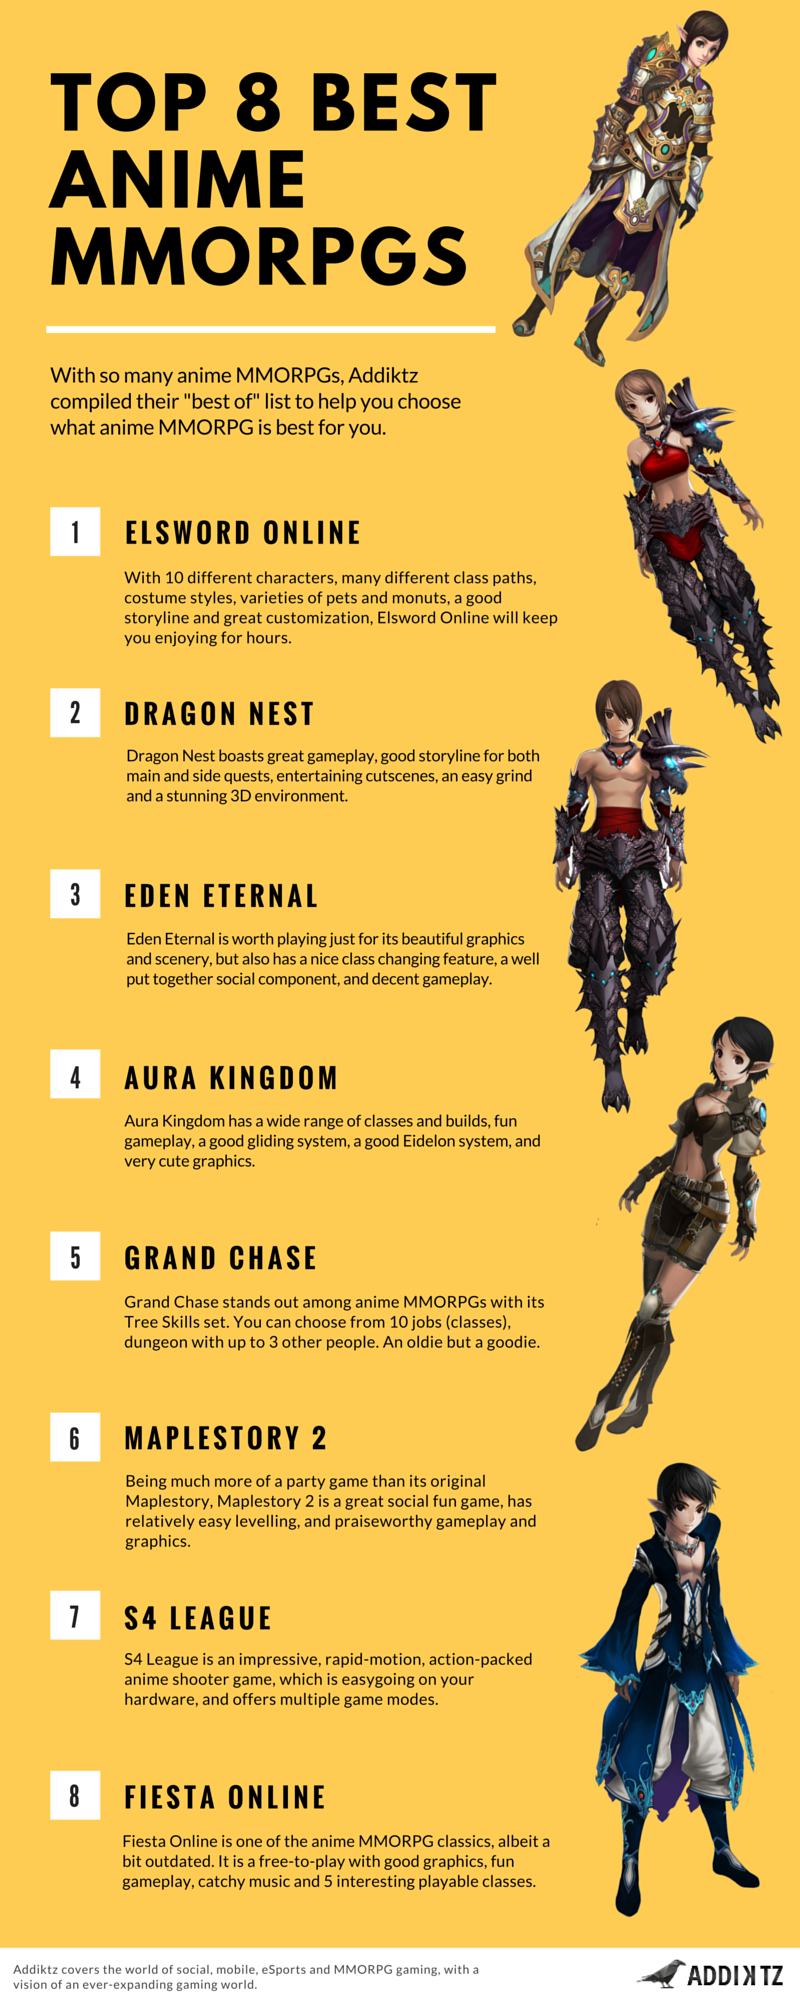 Top 8 Best Anime MMORPG Games [Infographic] | Anime MMORPGs